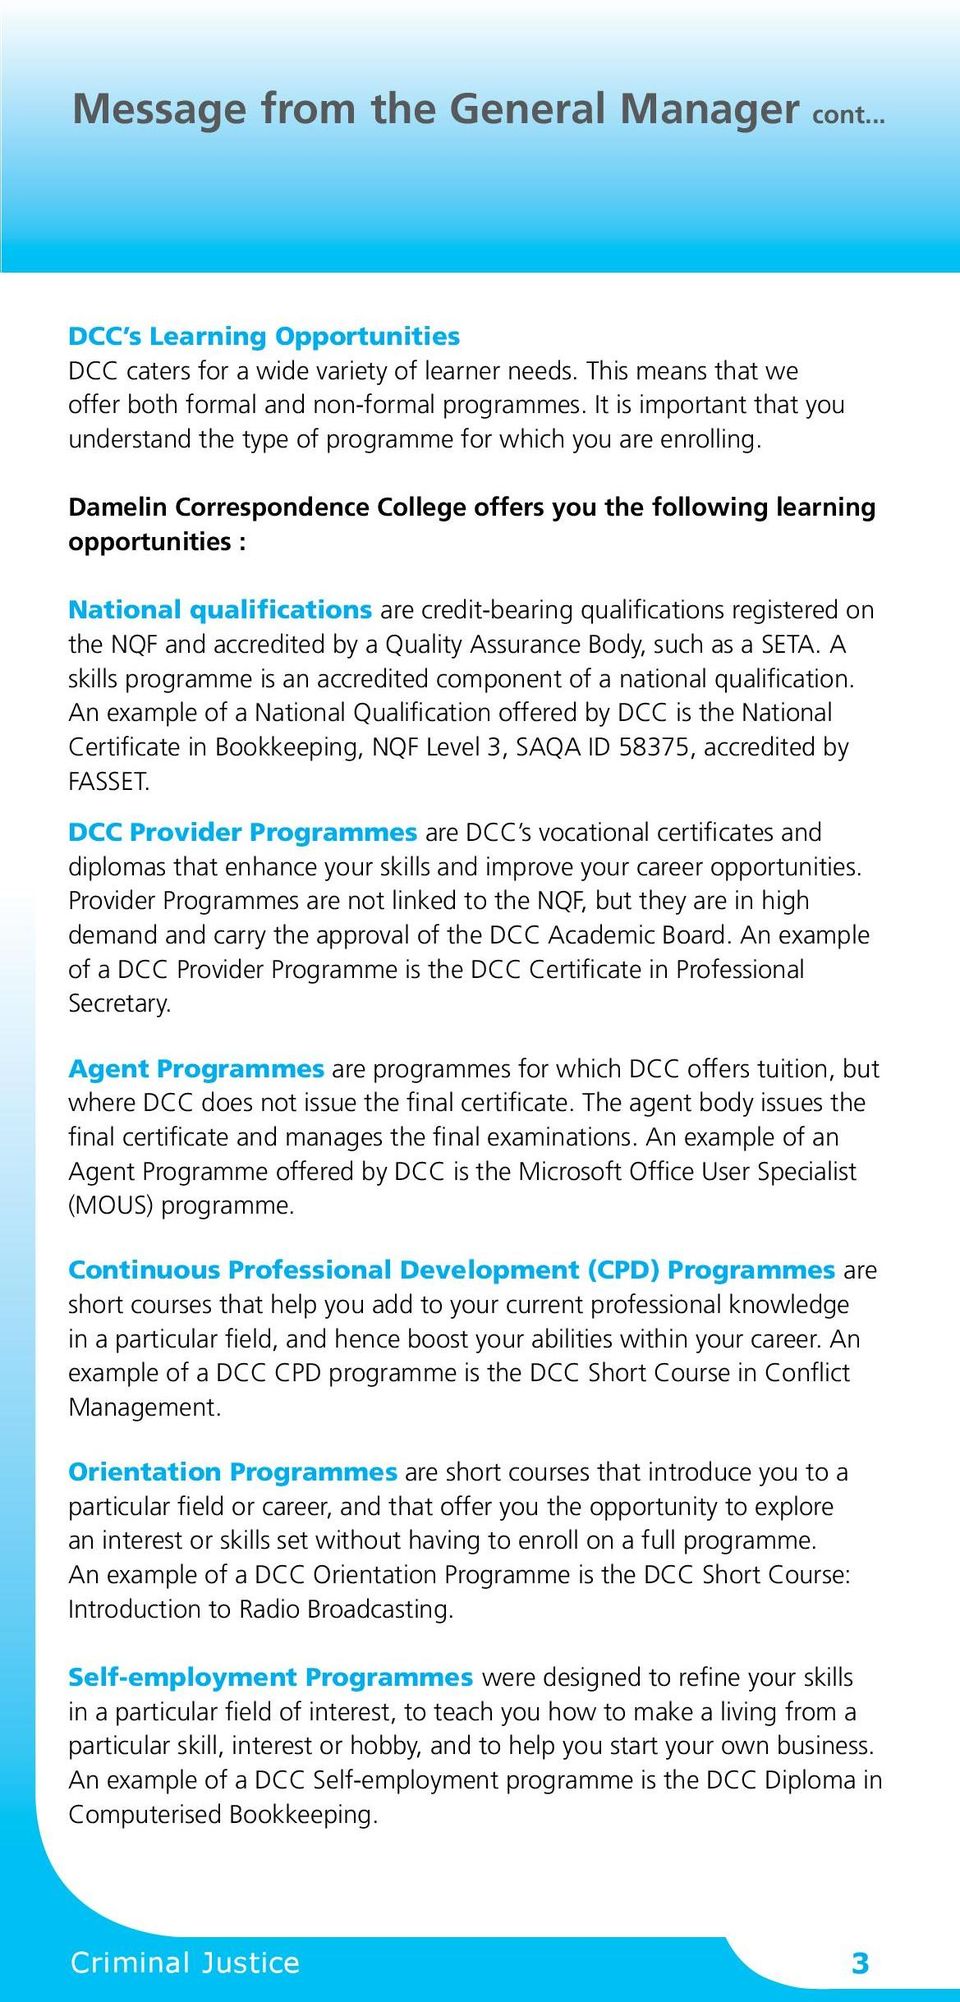 Damelin Correspondence College offers you the following learning opportunities : National qualifications are credit-bearing qualifications registered on the NQF and accredited by a Quality Assurance